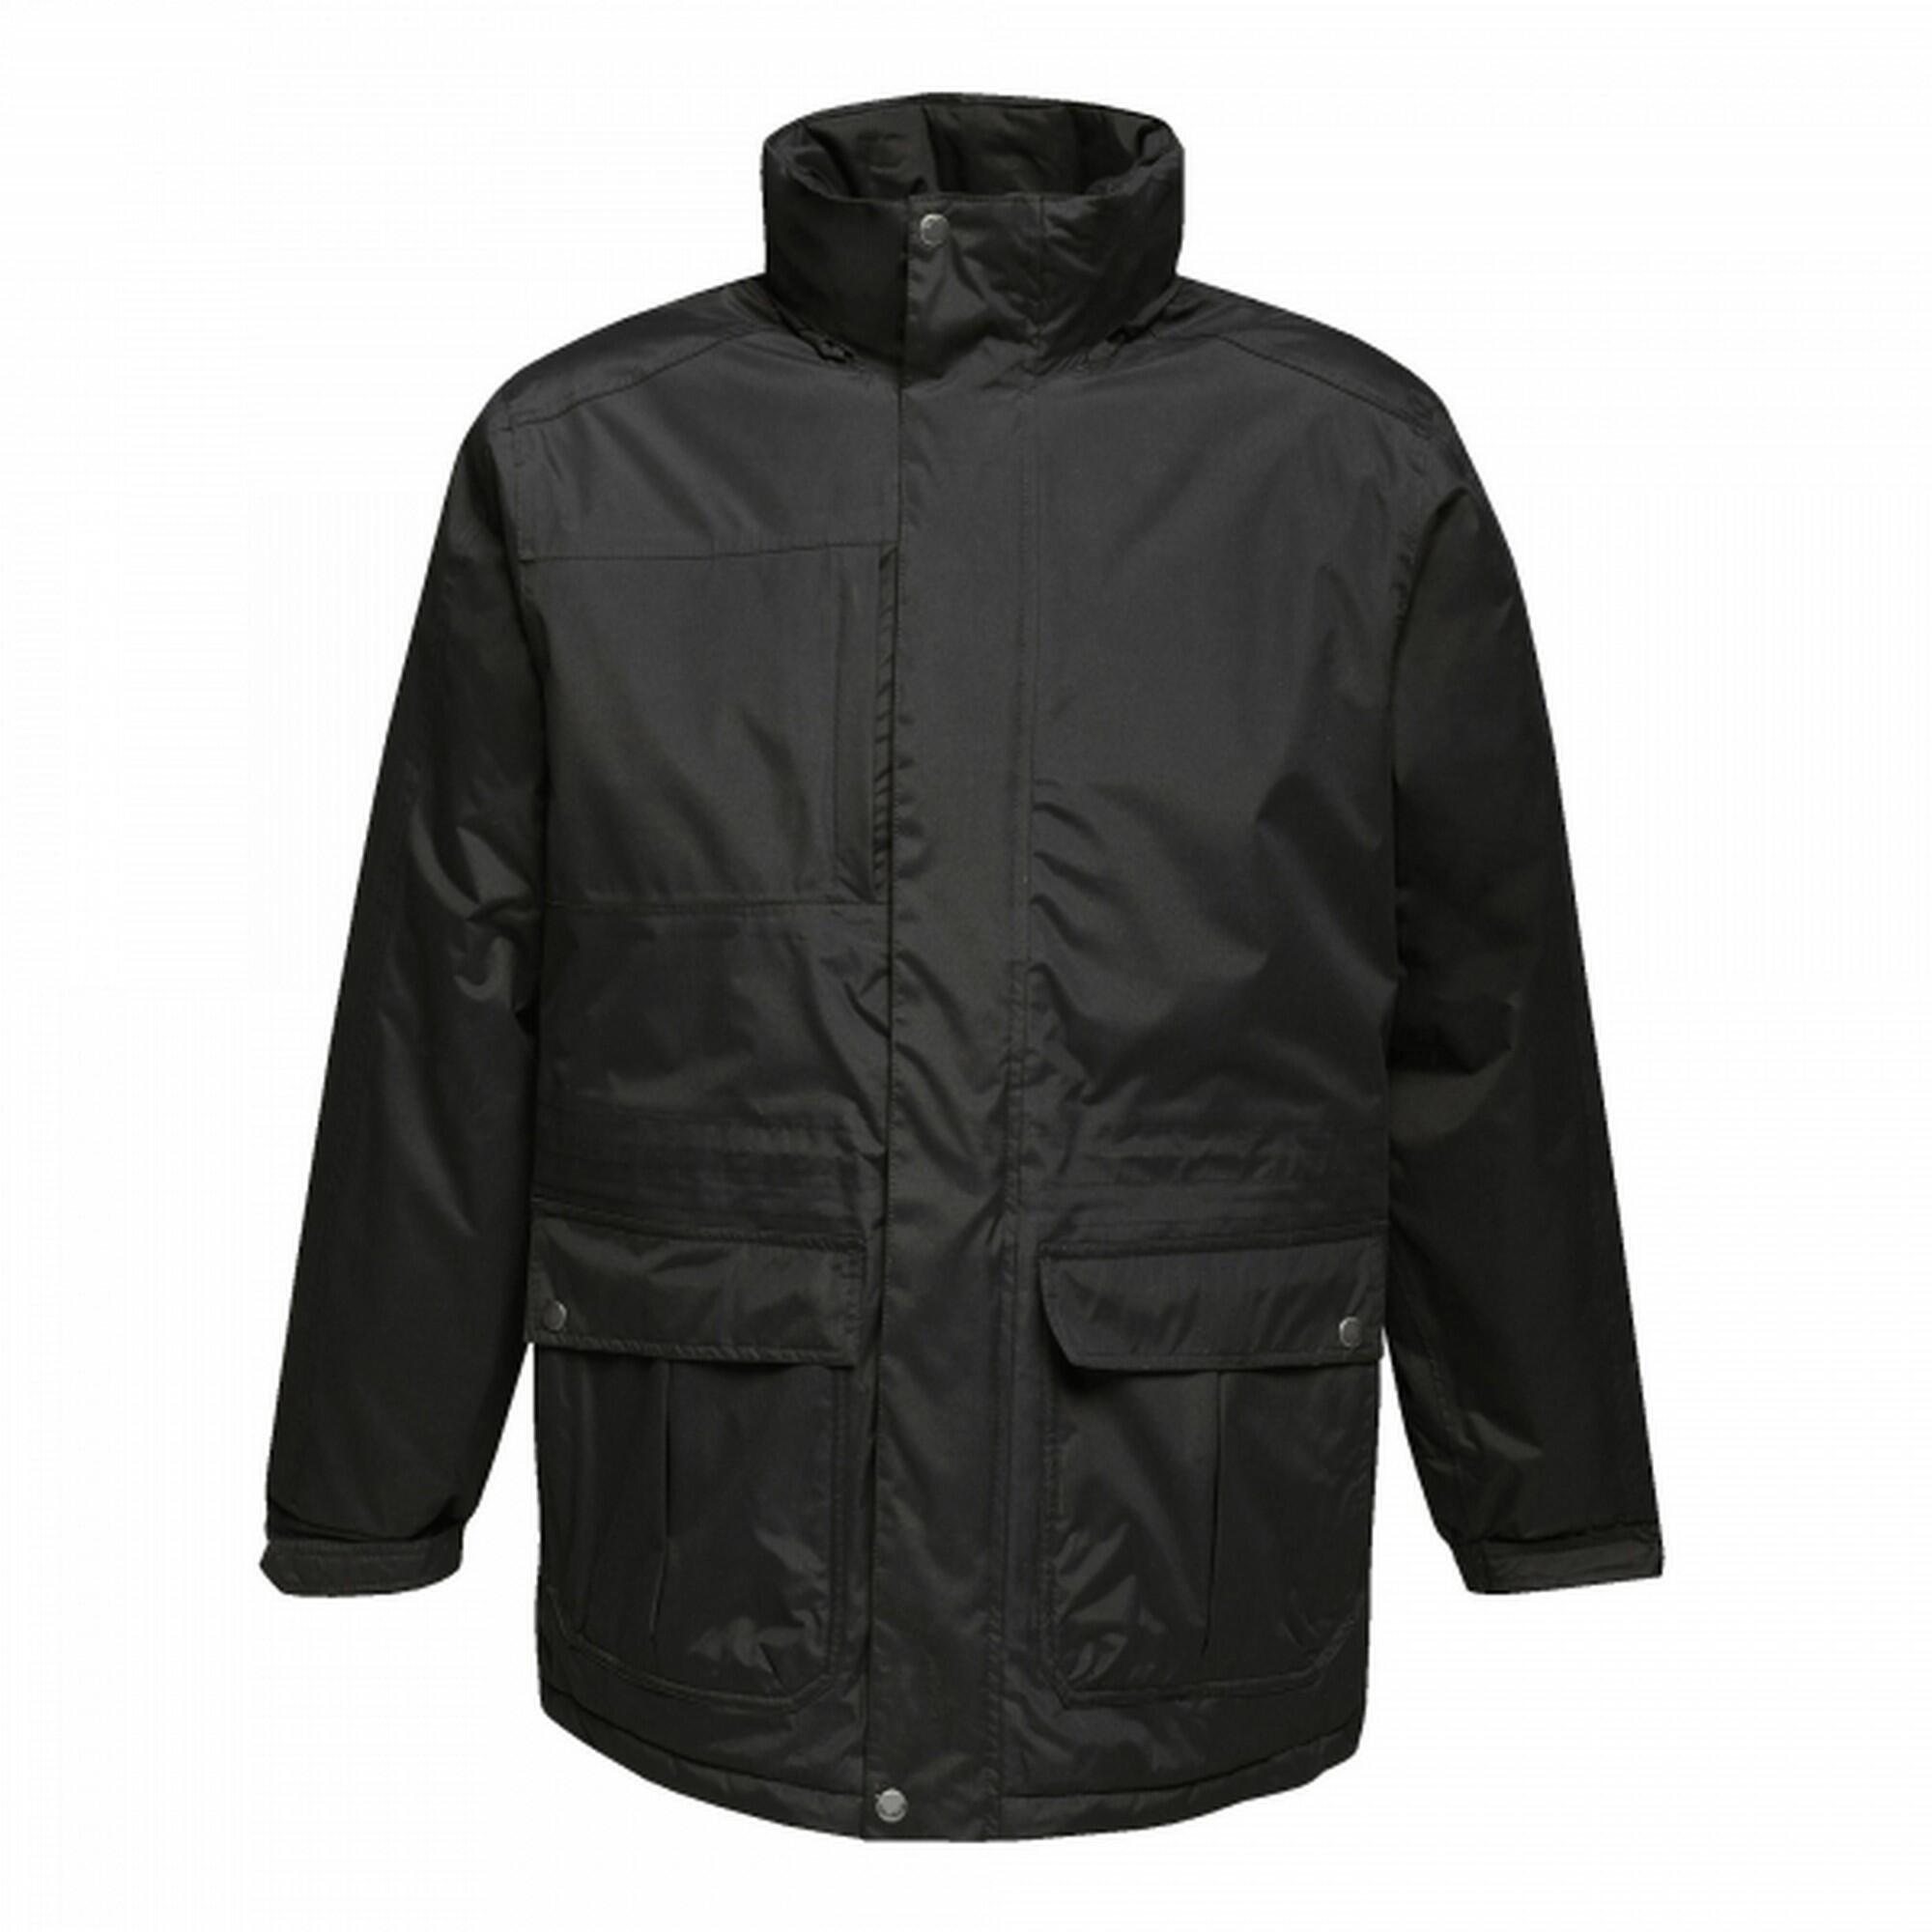 Mens Darby III Insulated Jacket (Black) 1/4